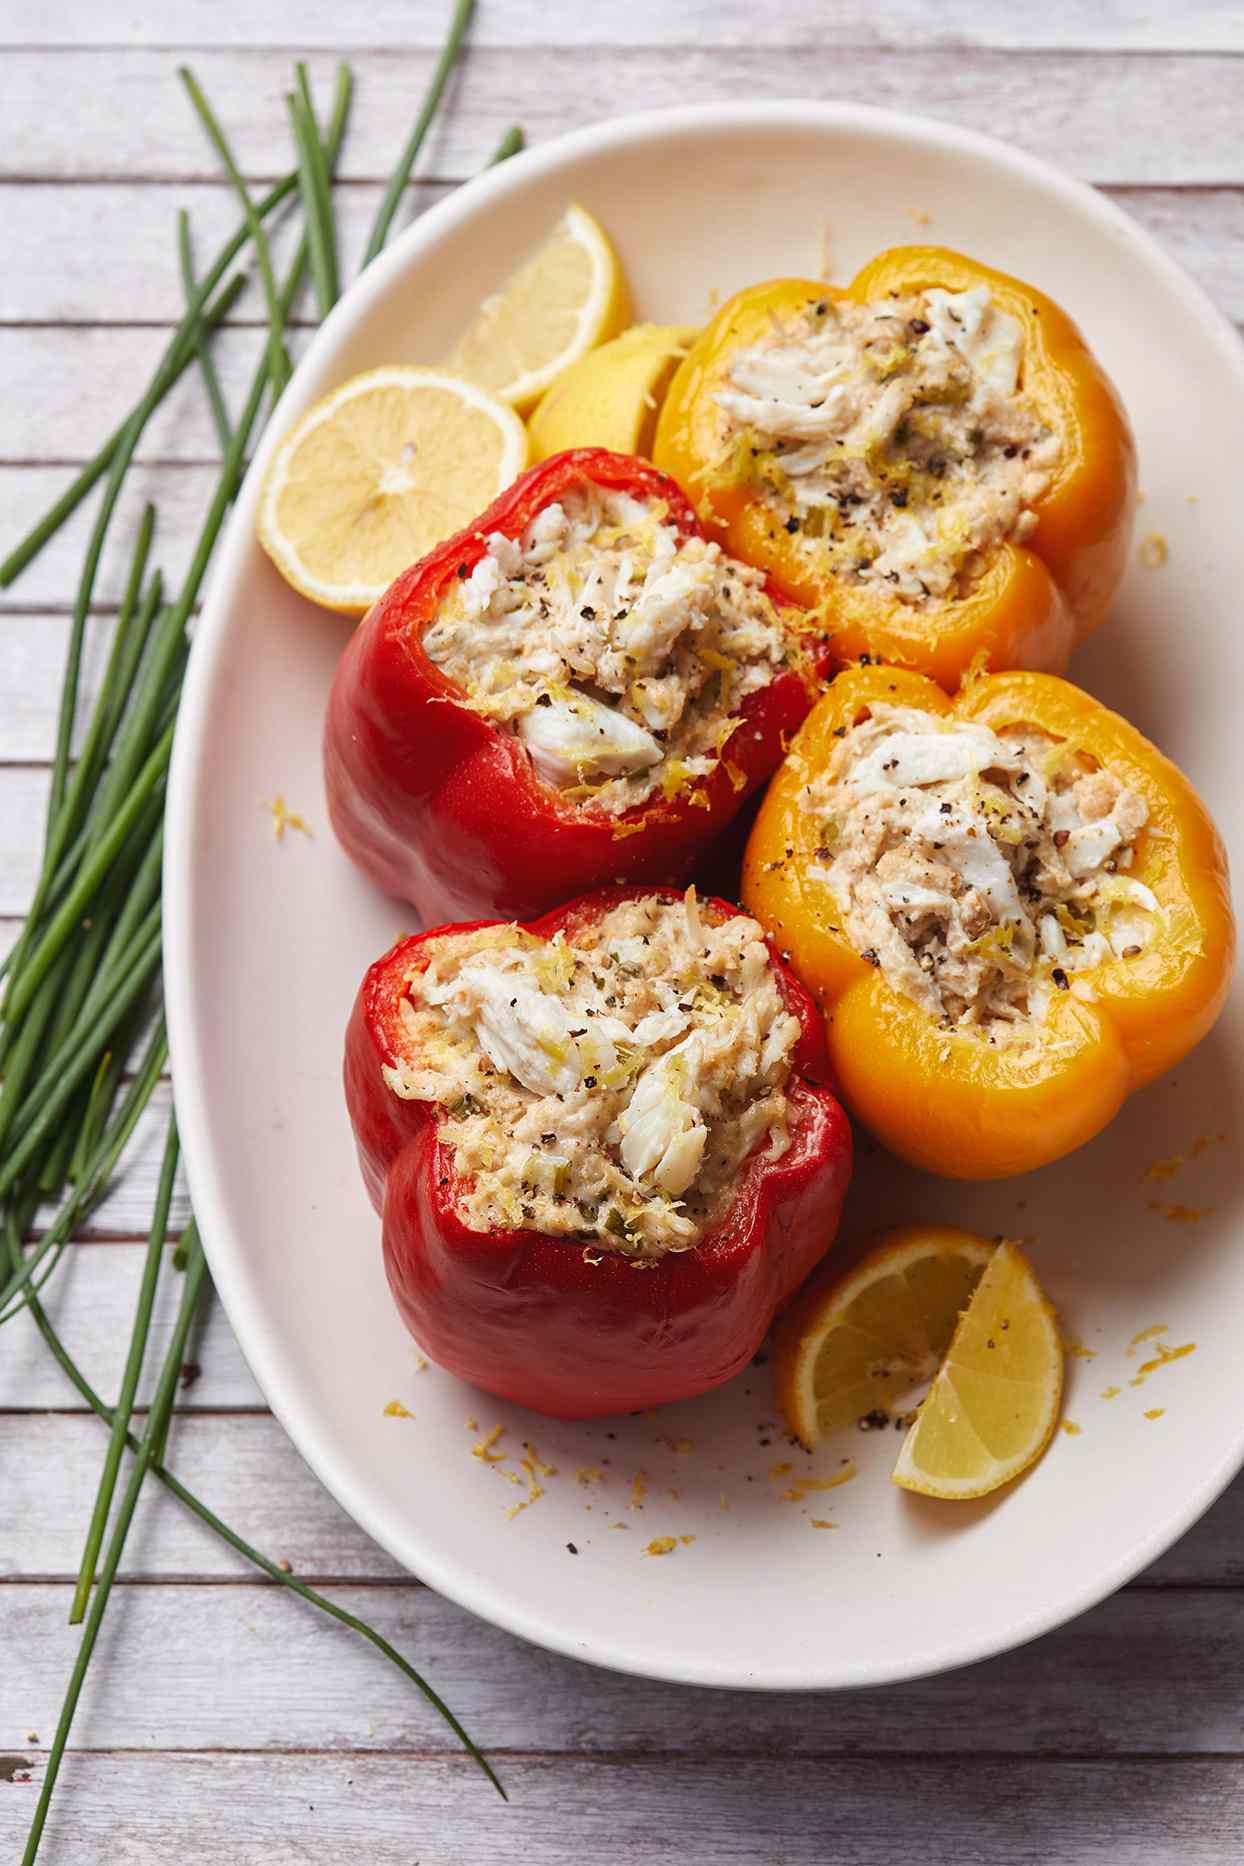 Fast or Slow Crab Stuffed Peppers